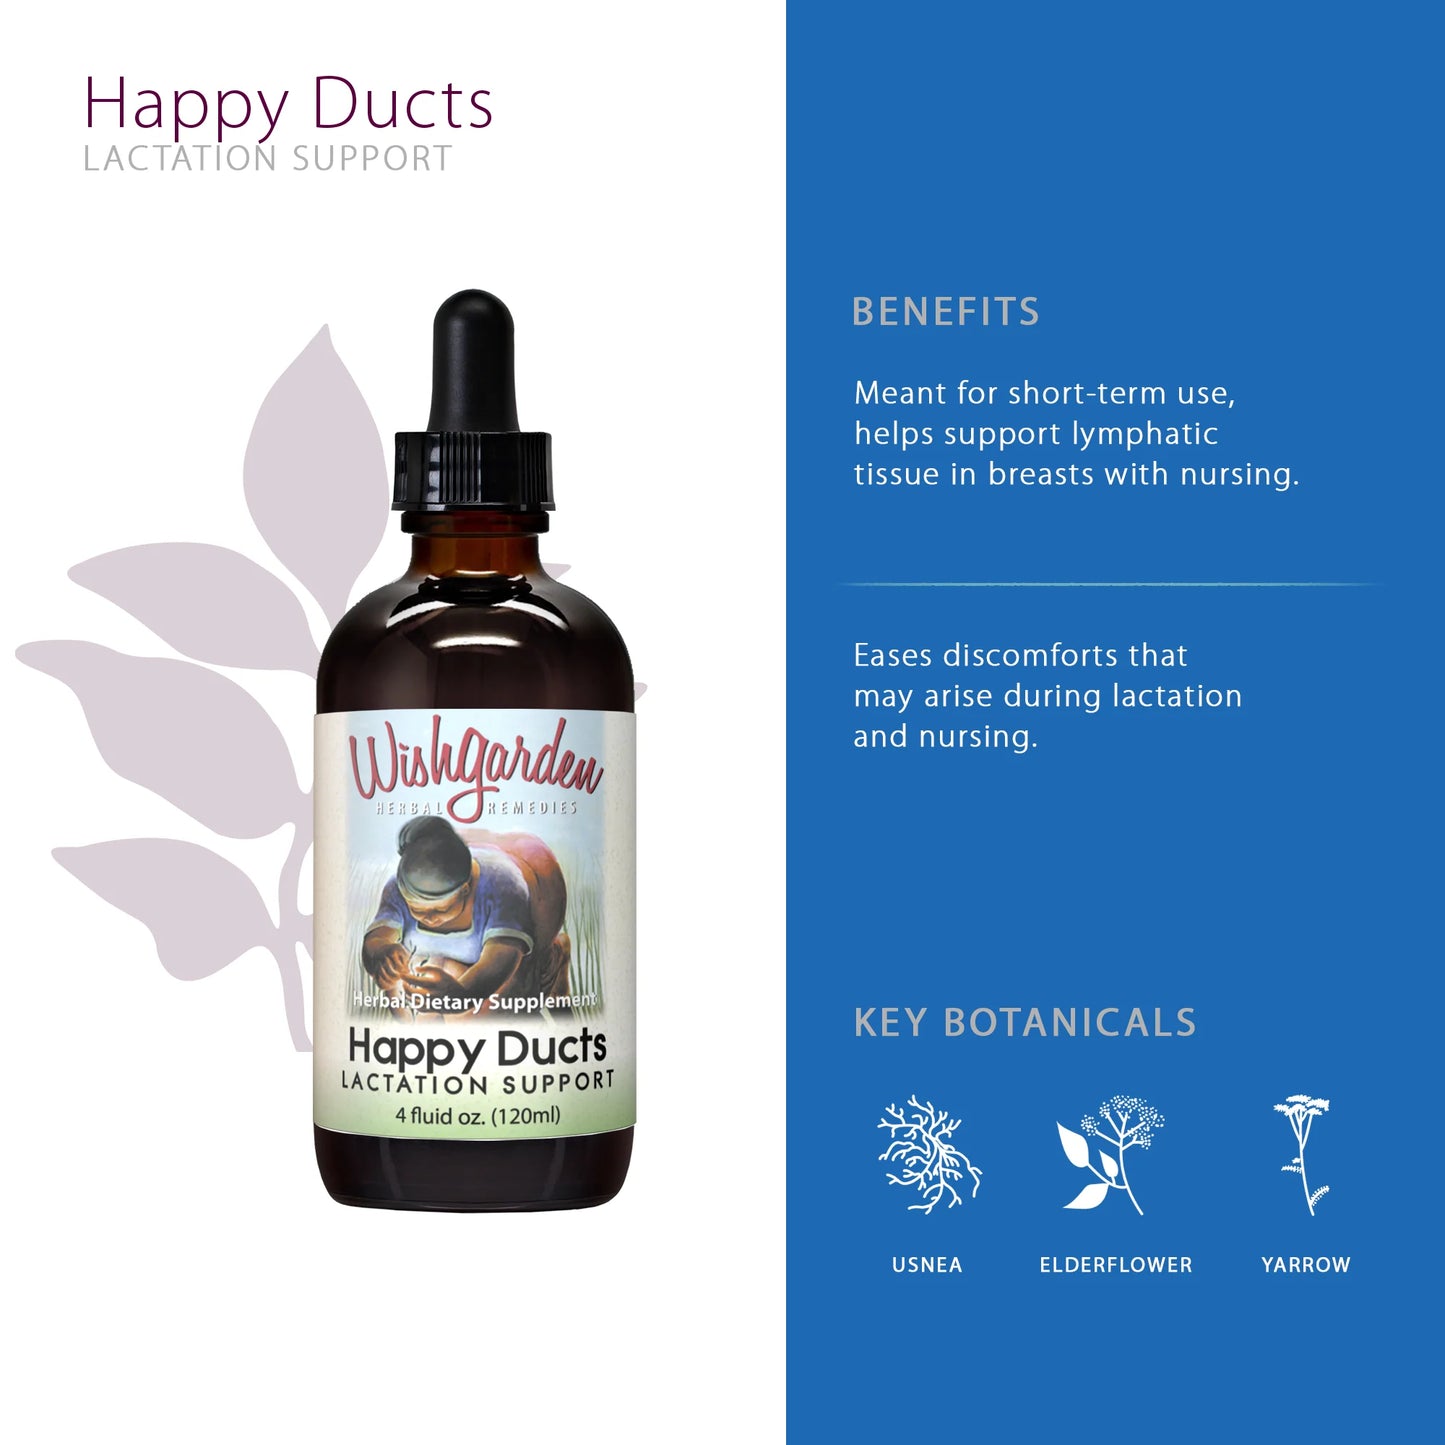 Happy Ducts Lactation Support